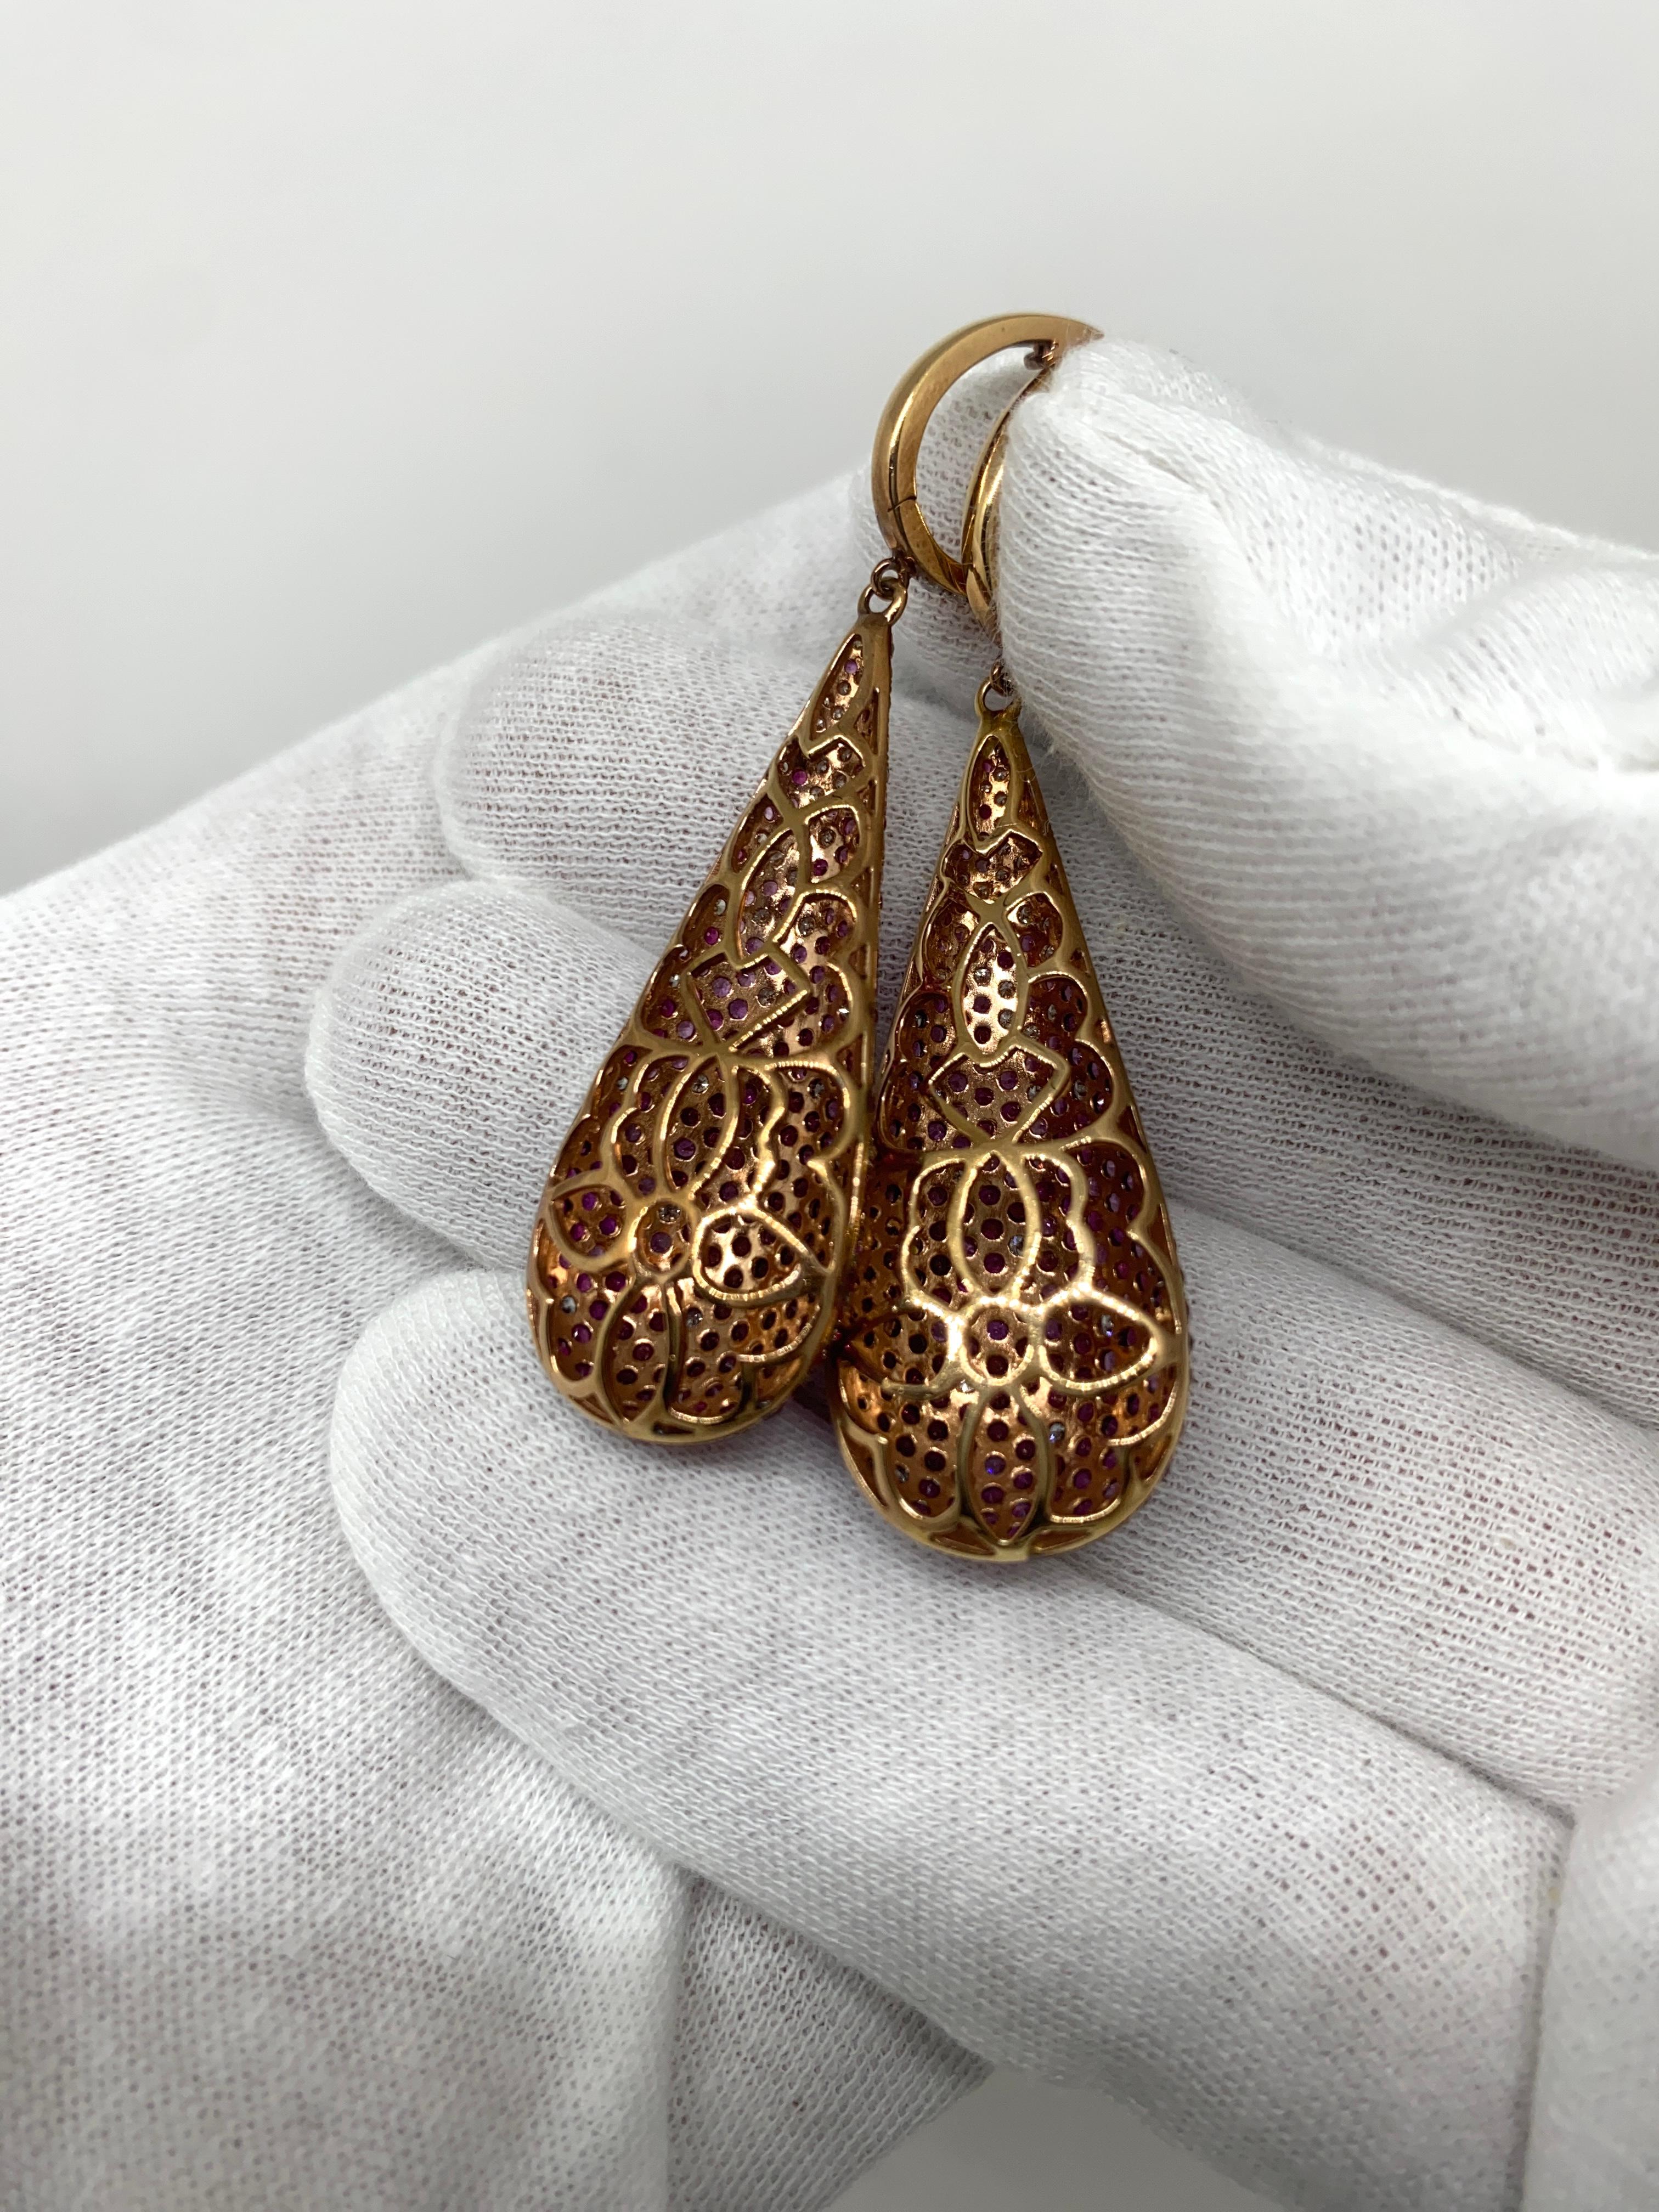 18kt Rose Gold Stunning Drop Earrings 4.13ct Rubies 1.82ct Sapphires & Diamond In New Condition For Sale In Bergamo, BG